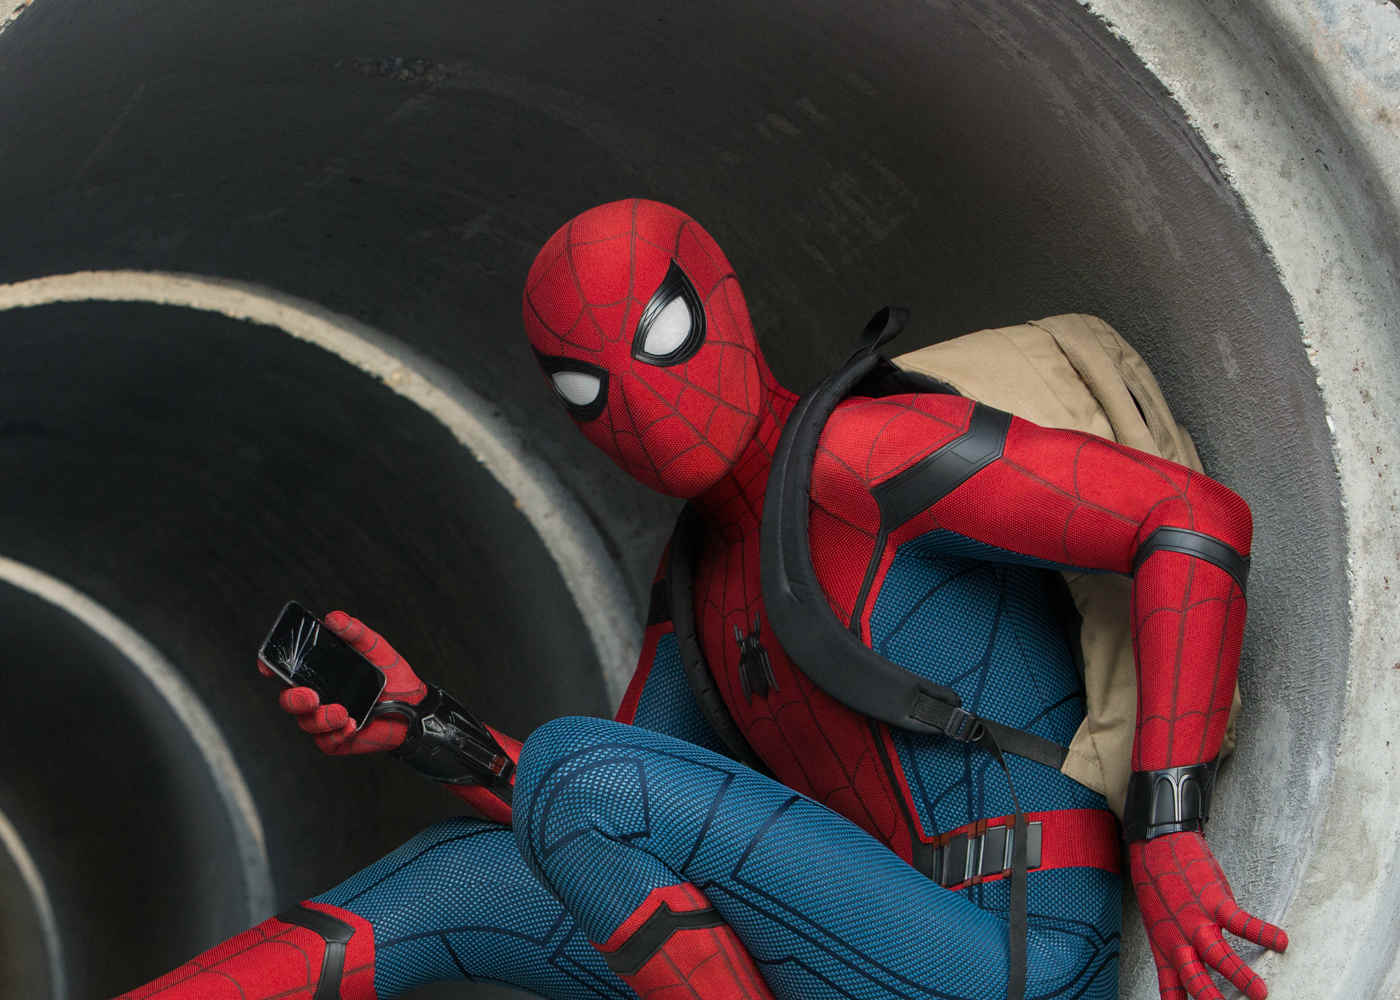 Will The Spider-Man: Homecoming Sequel Take Place In Europe?